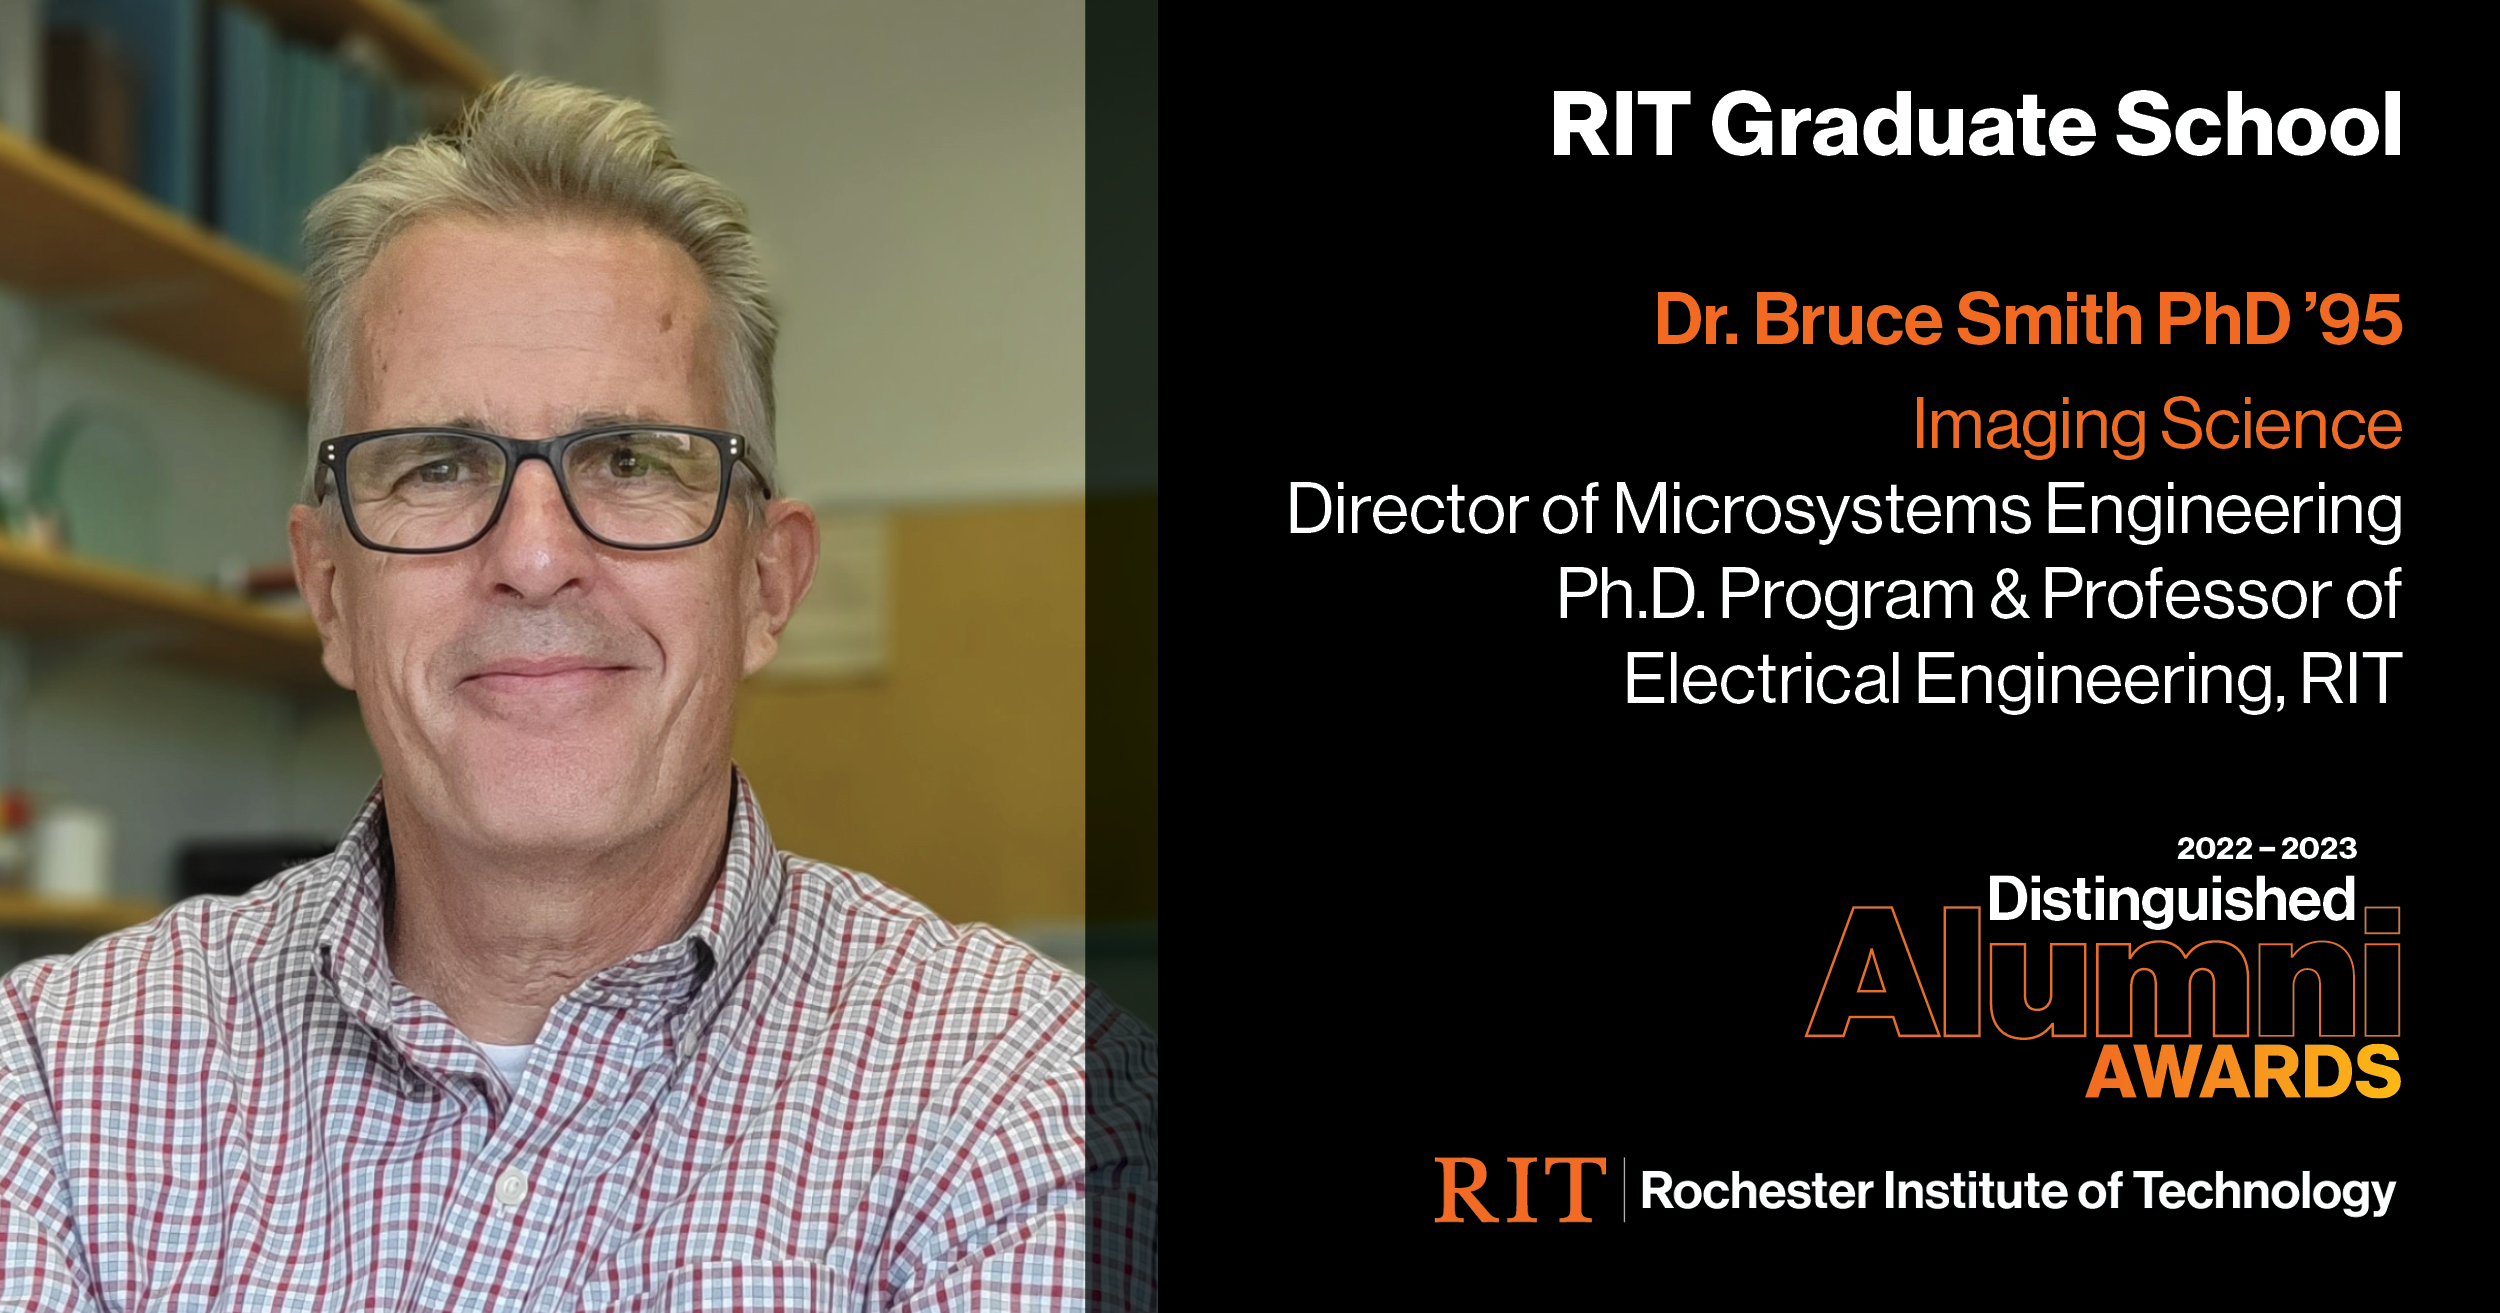 Image on Left: Head shot Dr. Bruce Smith  Text on RIght: Graduate School Dr. Bruce Smith PhD '95 Imagine Science, Director of Microsystems Engineering, Ph.D. Program & Professor of Electrical Engineering, RIT, 2022-2023 Alumni Awards RIT | Rochester Institute of Technology